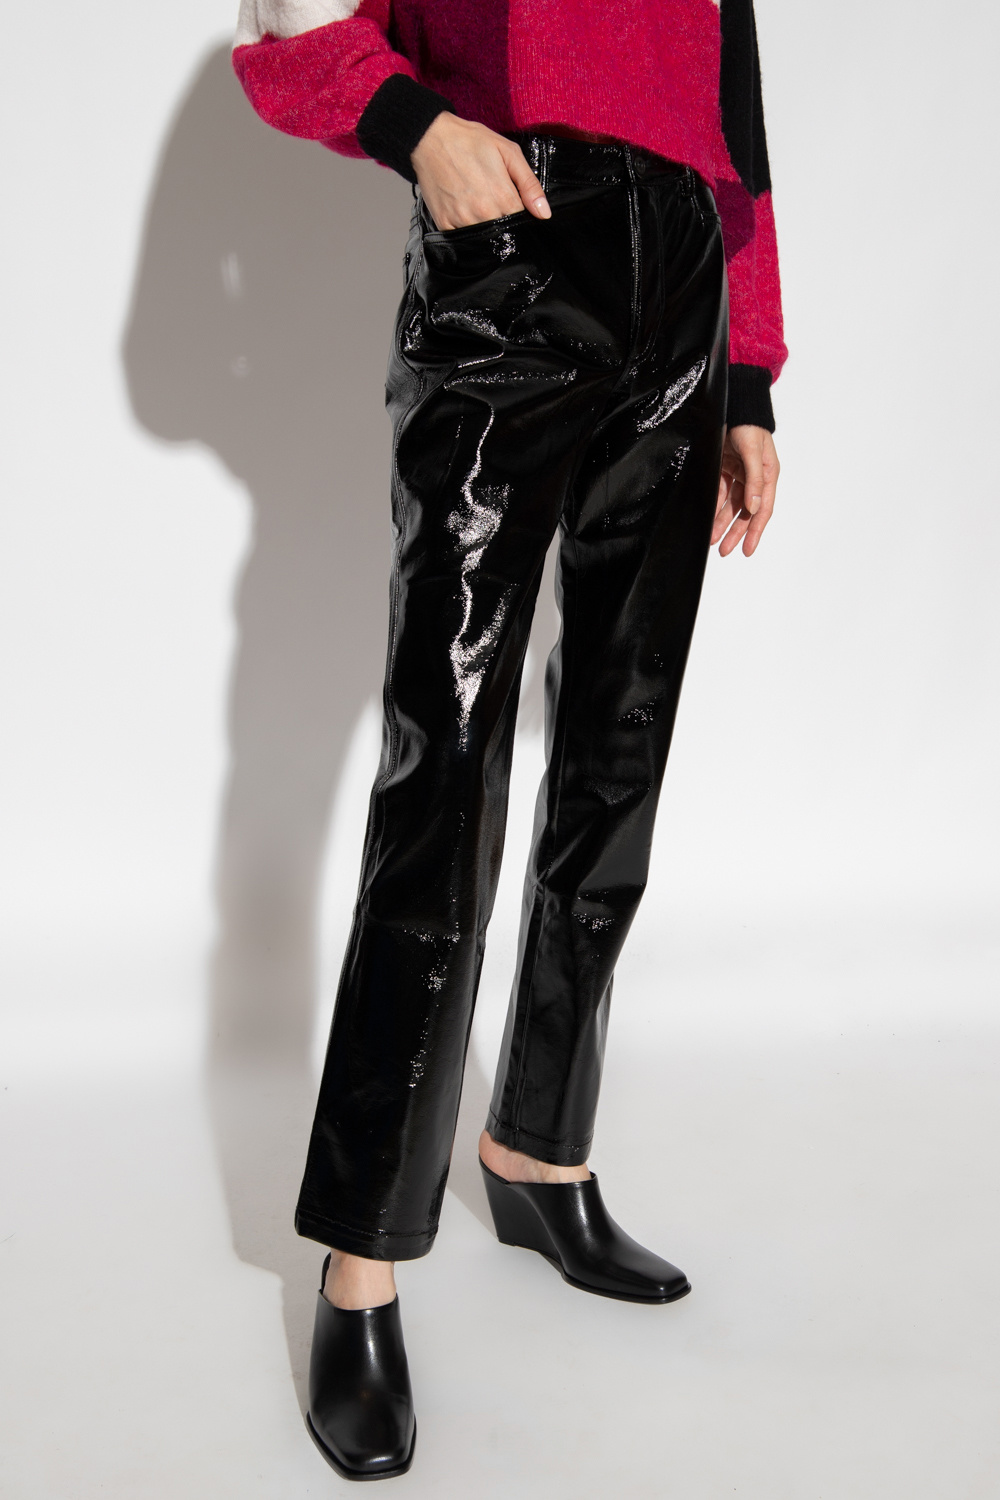 Proenza Schouler White Label Varnished Varley trousers